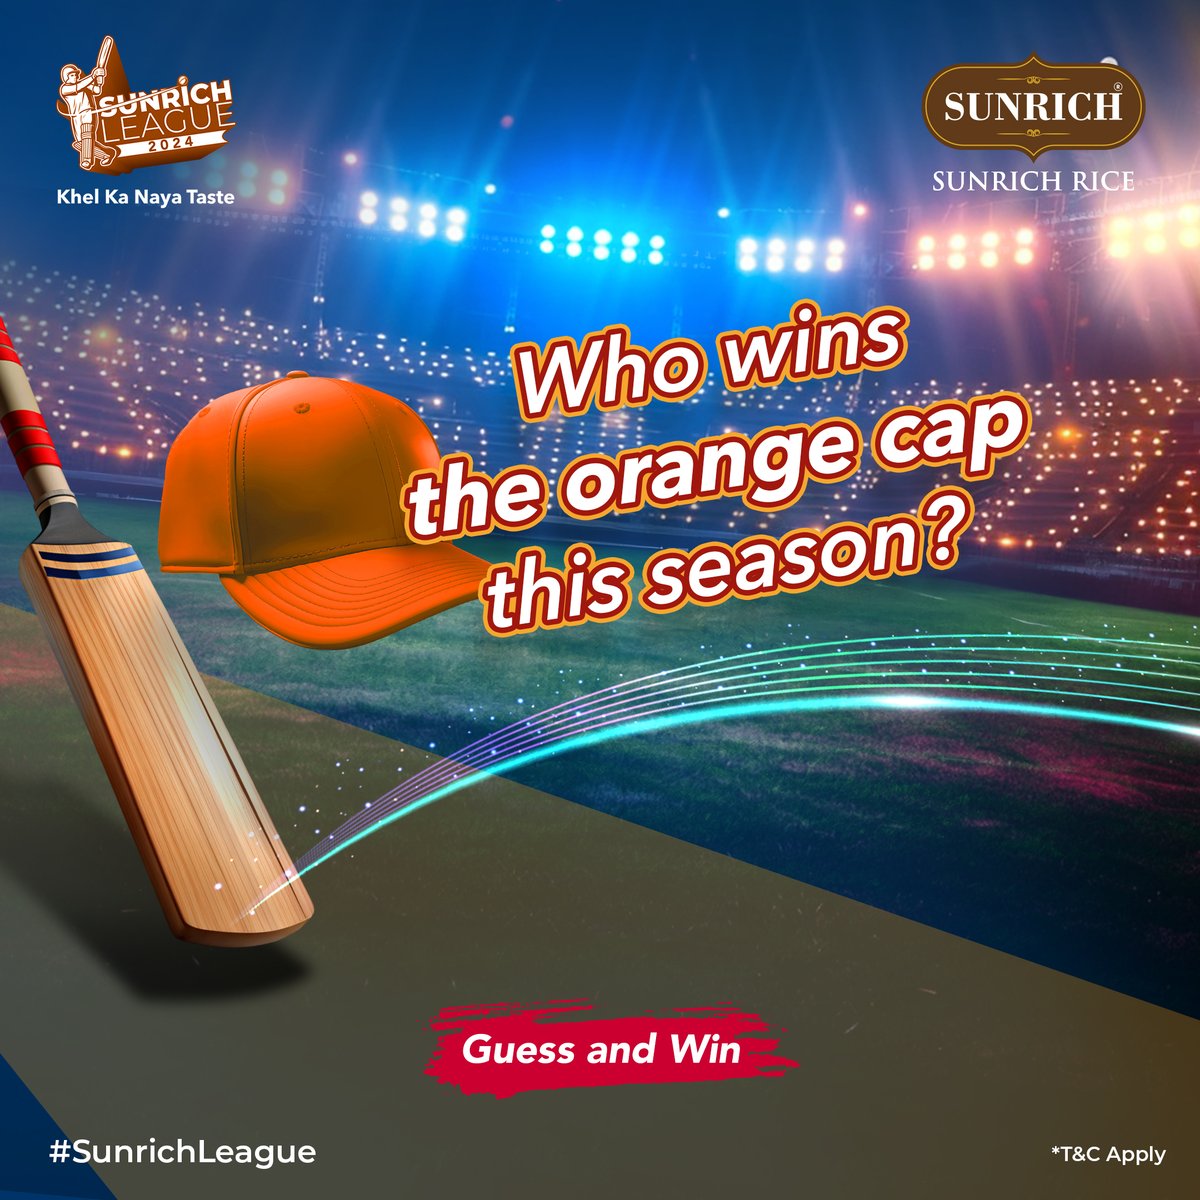 Who do you think will score the maximum runs this season? Predict to win hampers. Participation rules: 1. Follow Sunrich Rice on IG/FB/X 2. Participate the contest, comment and tag us 3. Share it with your friends #SunrichRice #SunrichLeague #RohitSharma #PredictAndWin #Contest